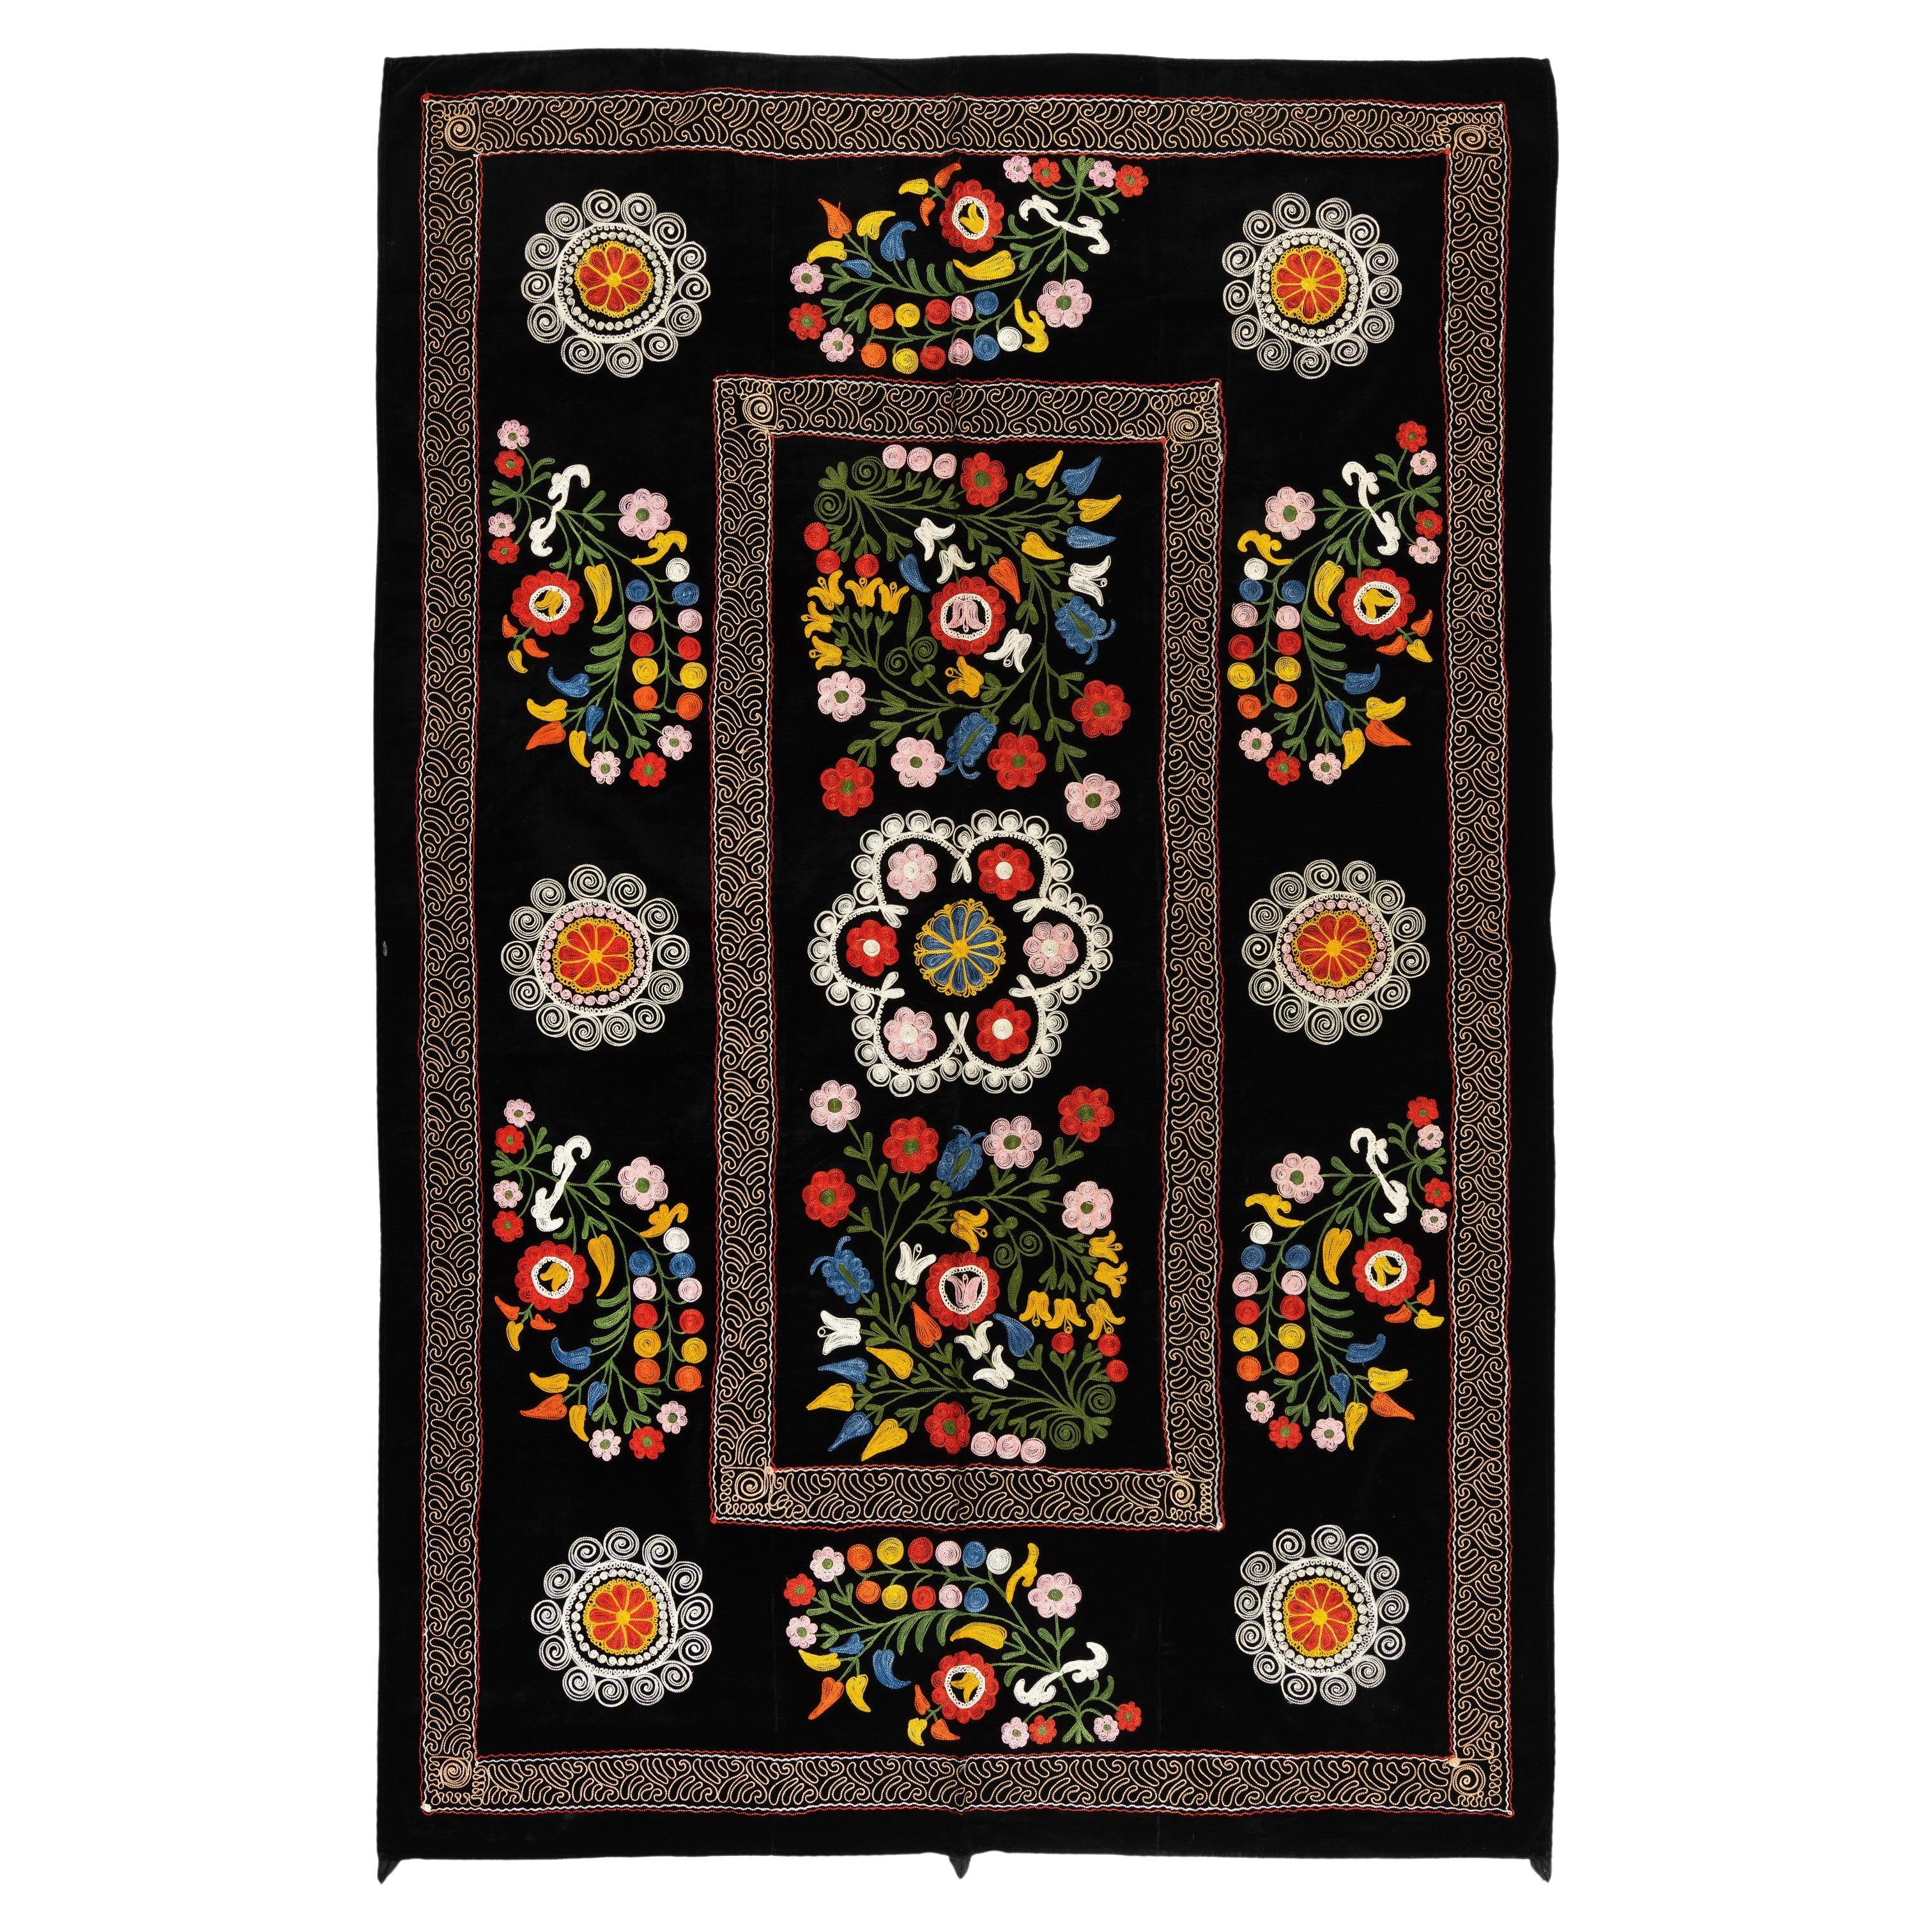 4.4x6.7 Ft Silk Embroidered Suzani Bed Cover, Floral Pattern Black Wall Hanging For Sale